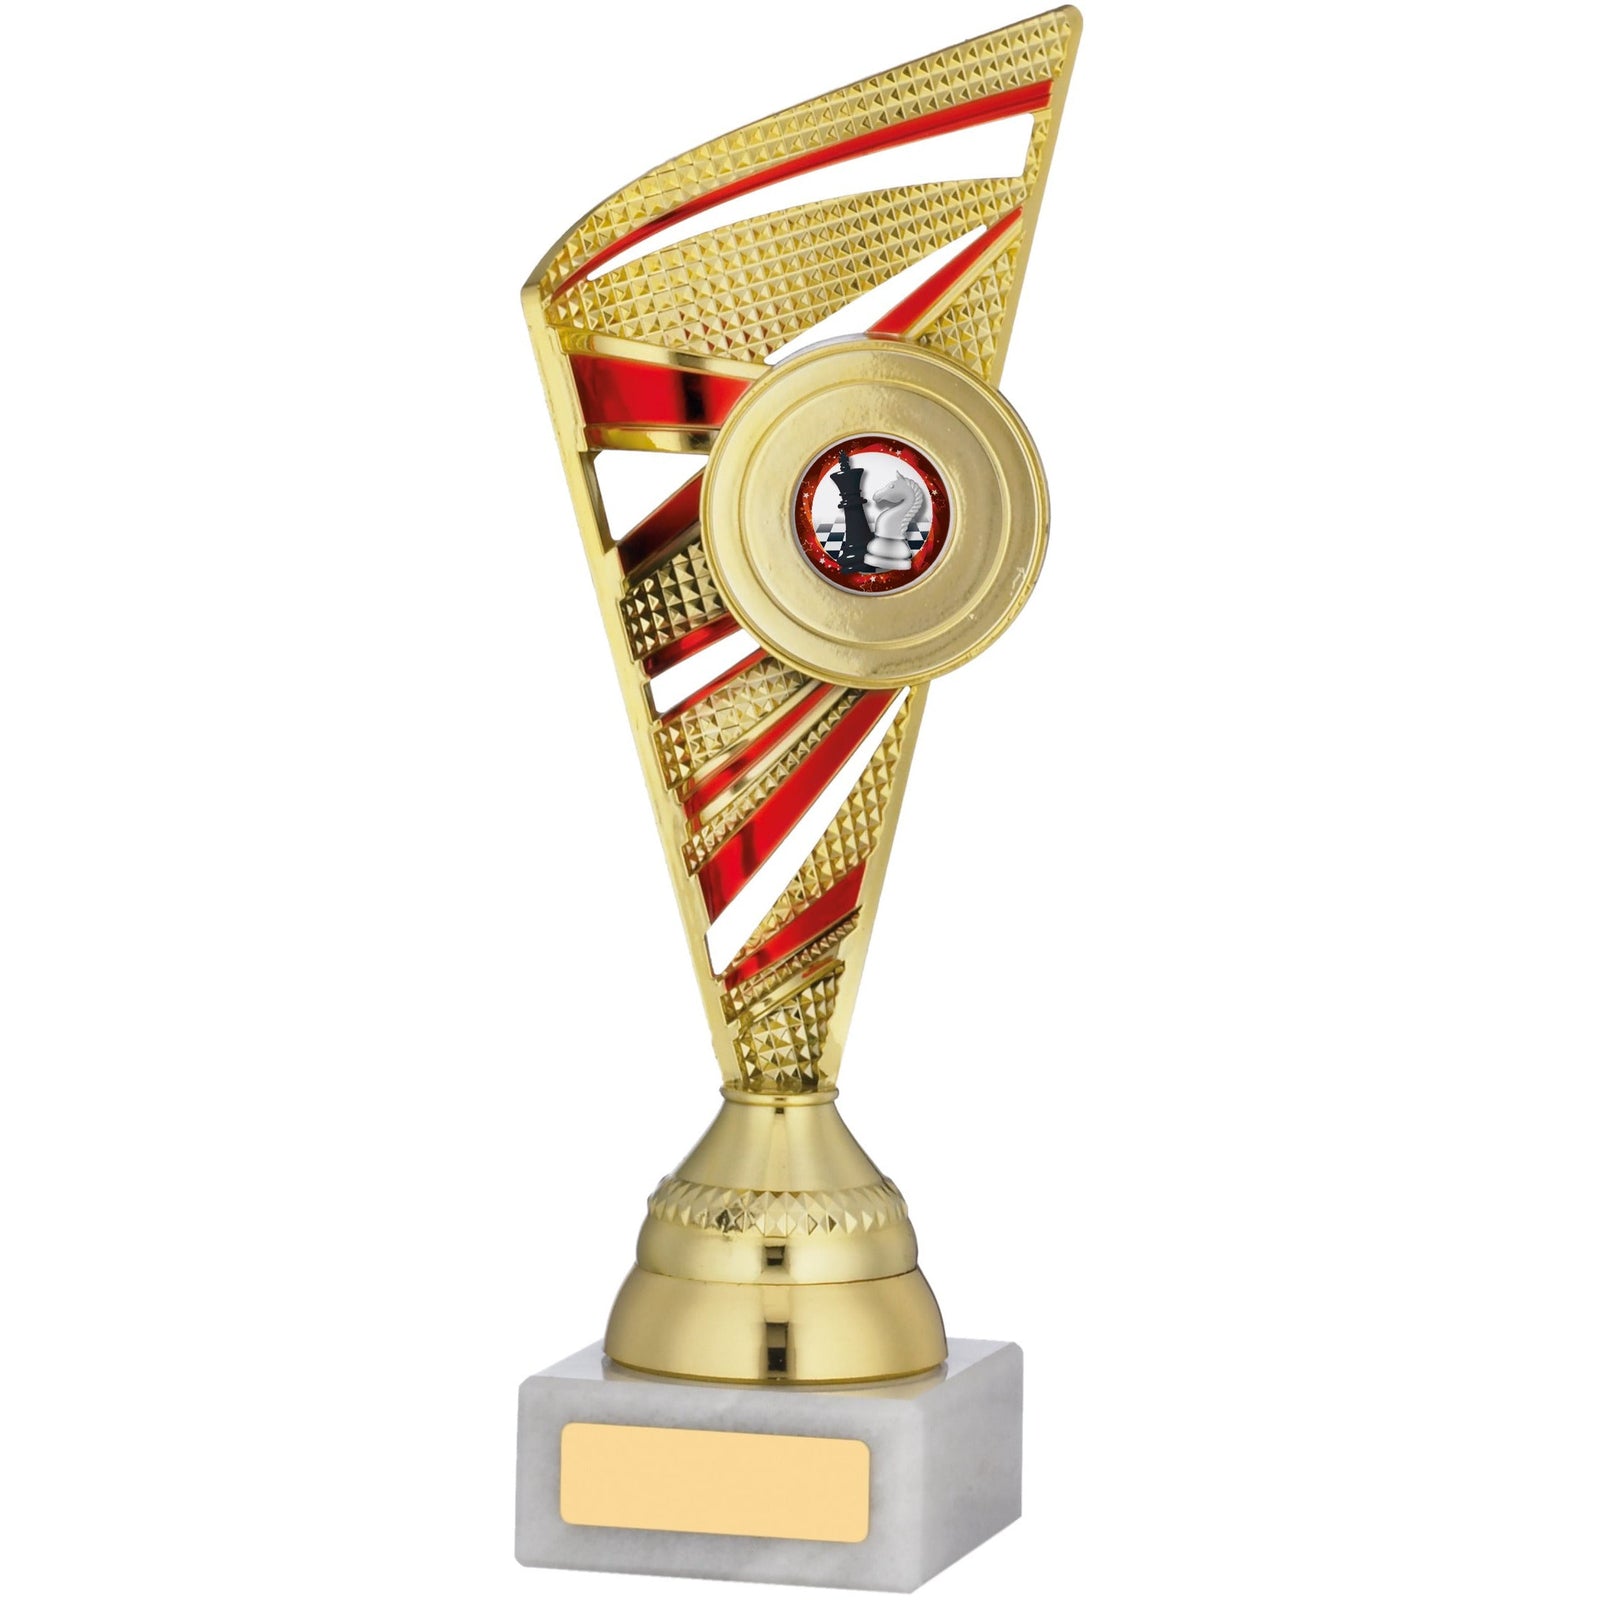 Gold And Red Finned Trophy Cup